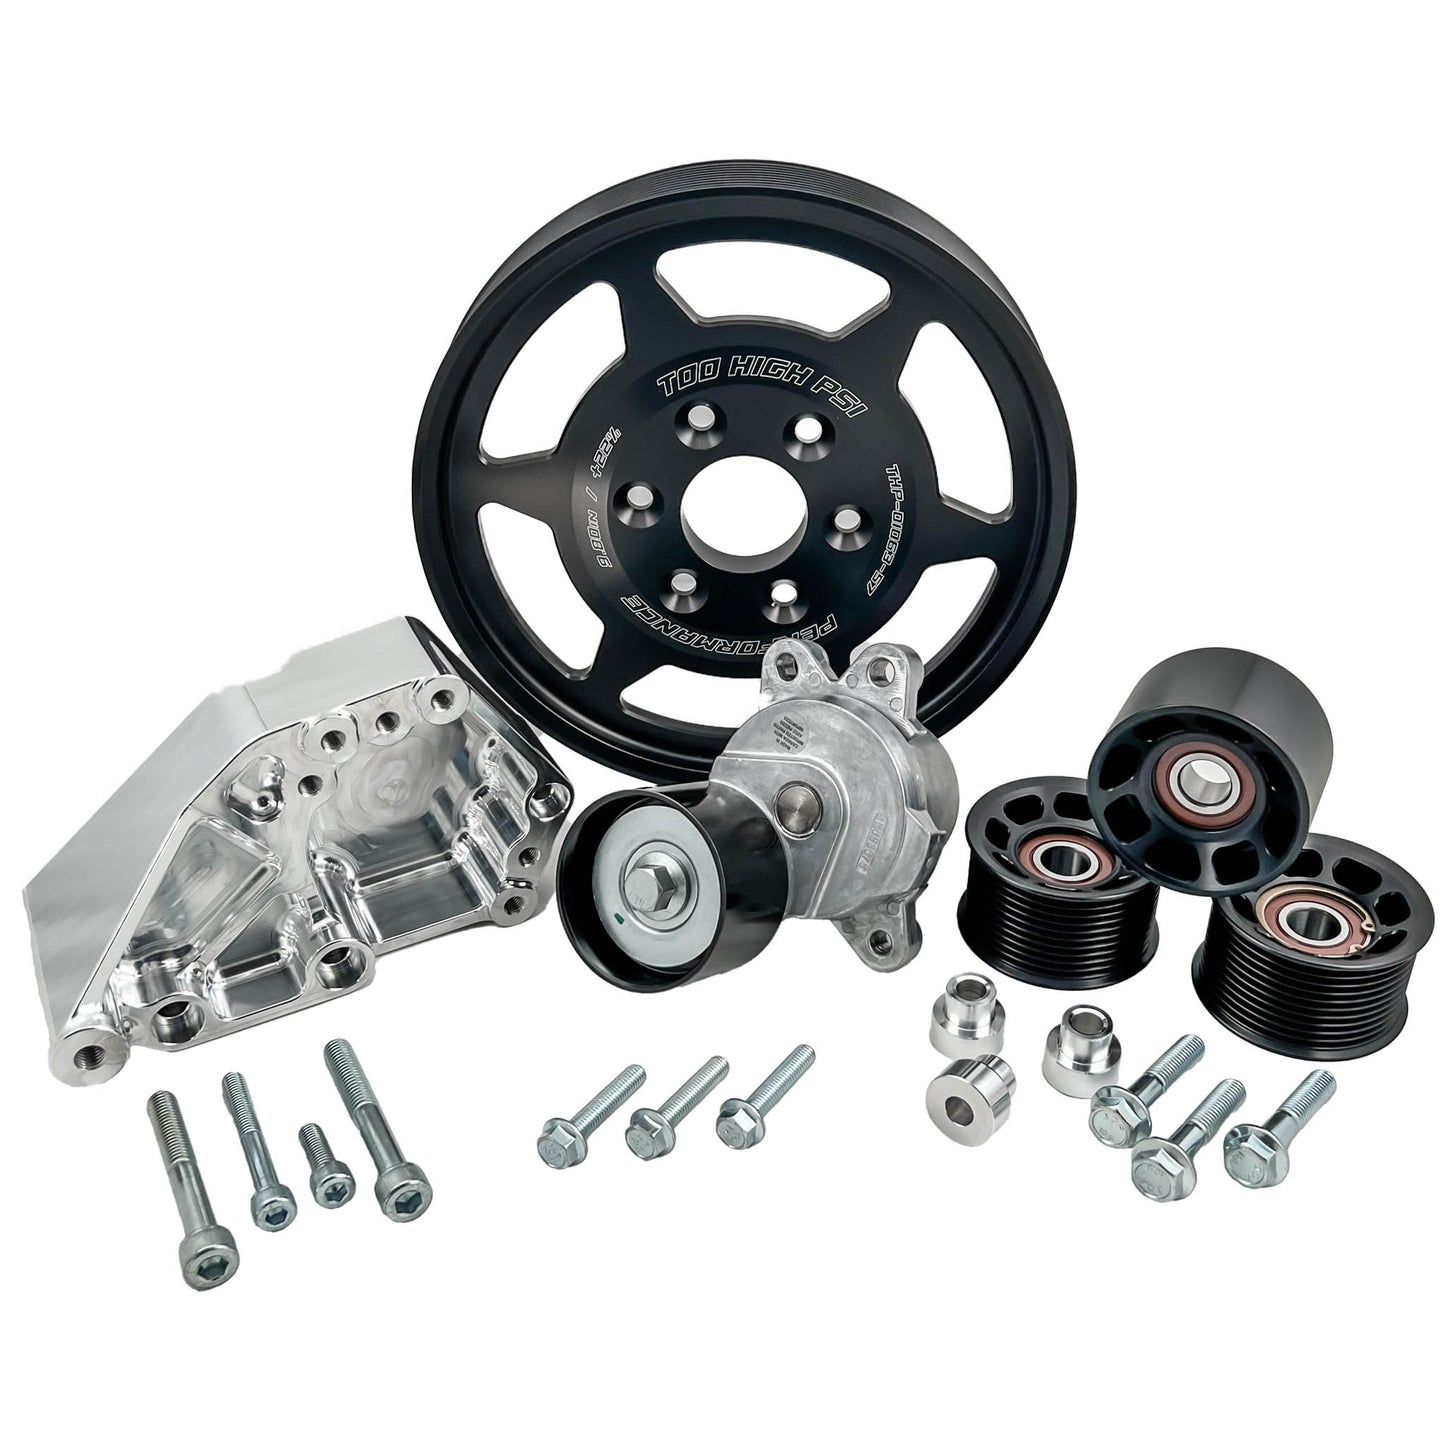 C7 Corvette - LT1/LT4 10 rib Supercharger Drive Package - includes +15% or +22% Lower Pulley